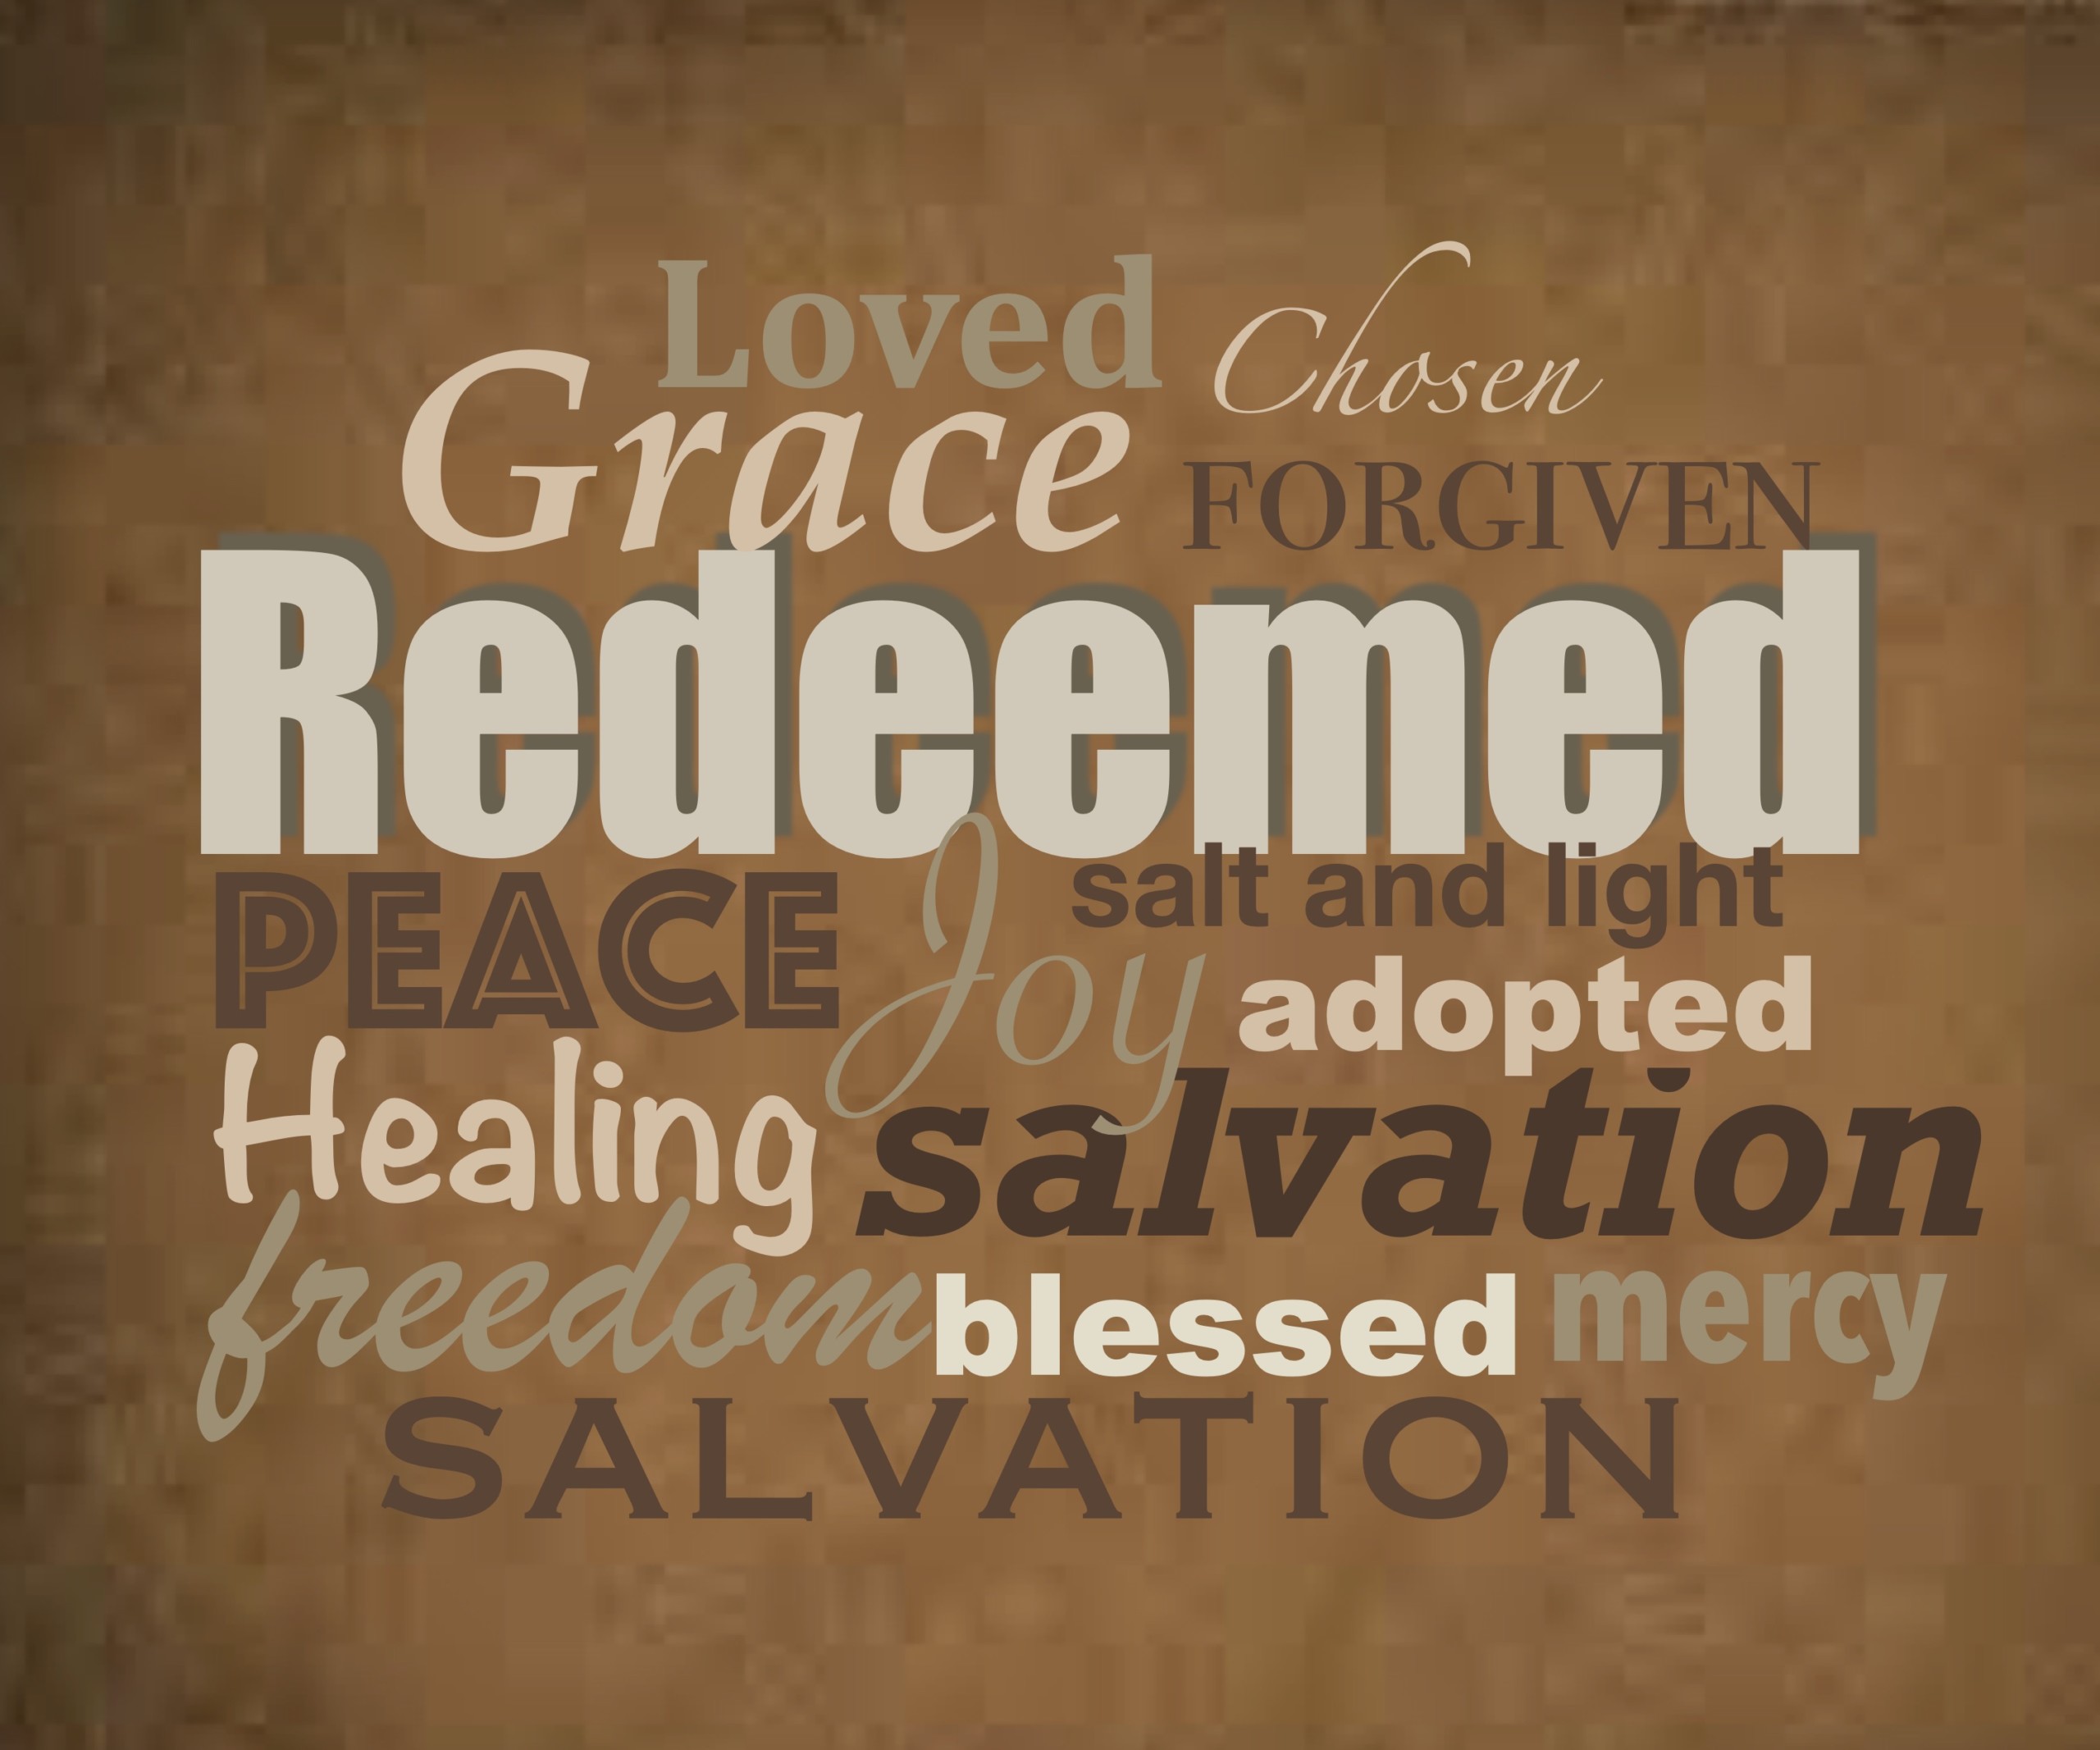 We the redeemed